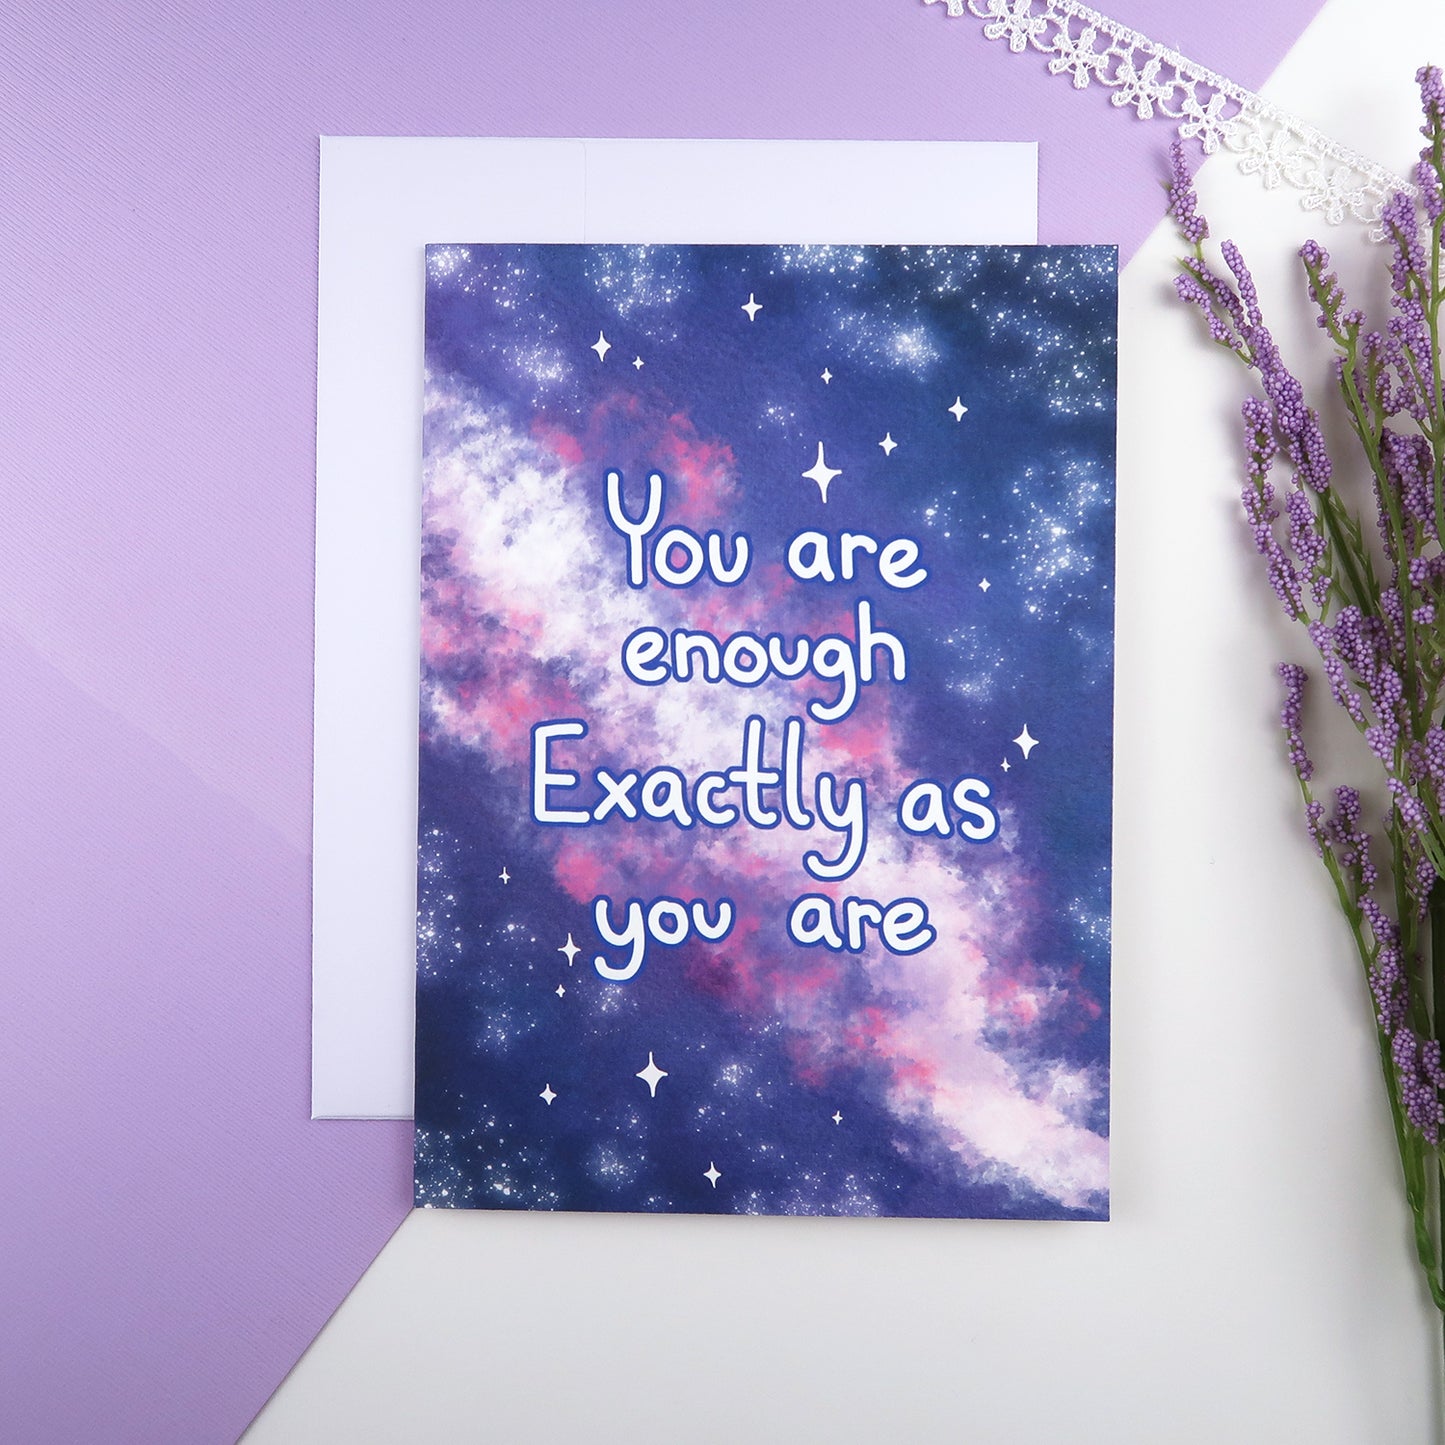 You are Enough - Greeting Card